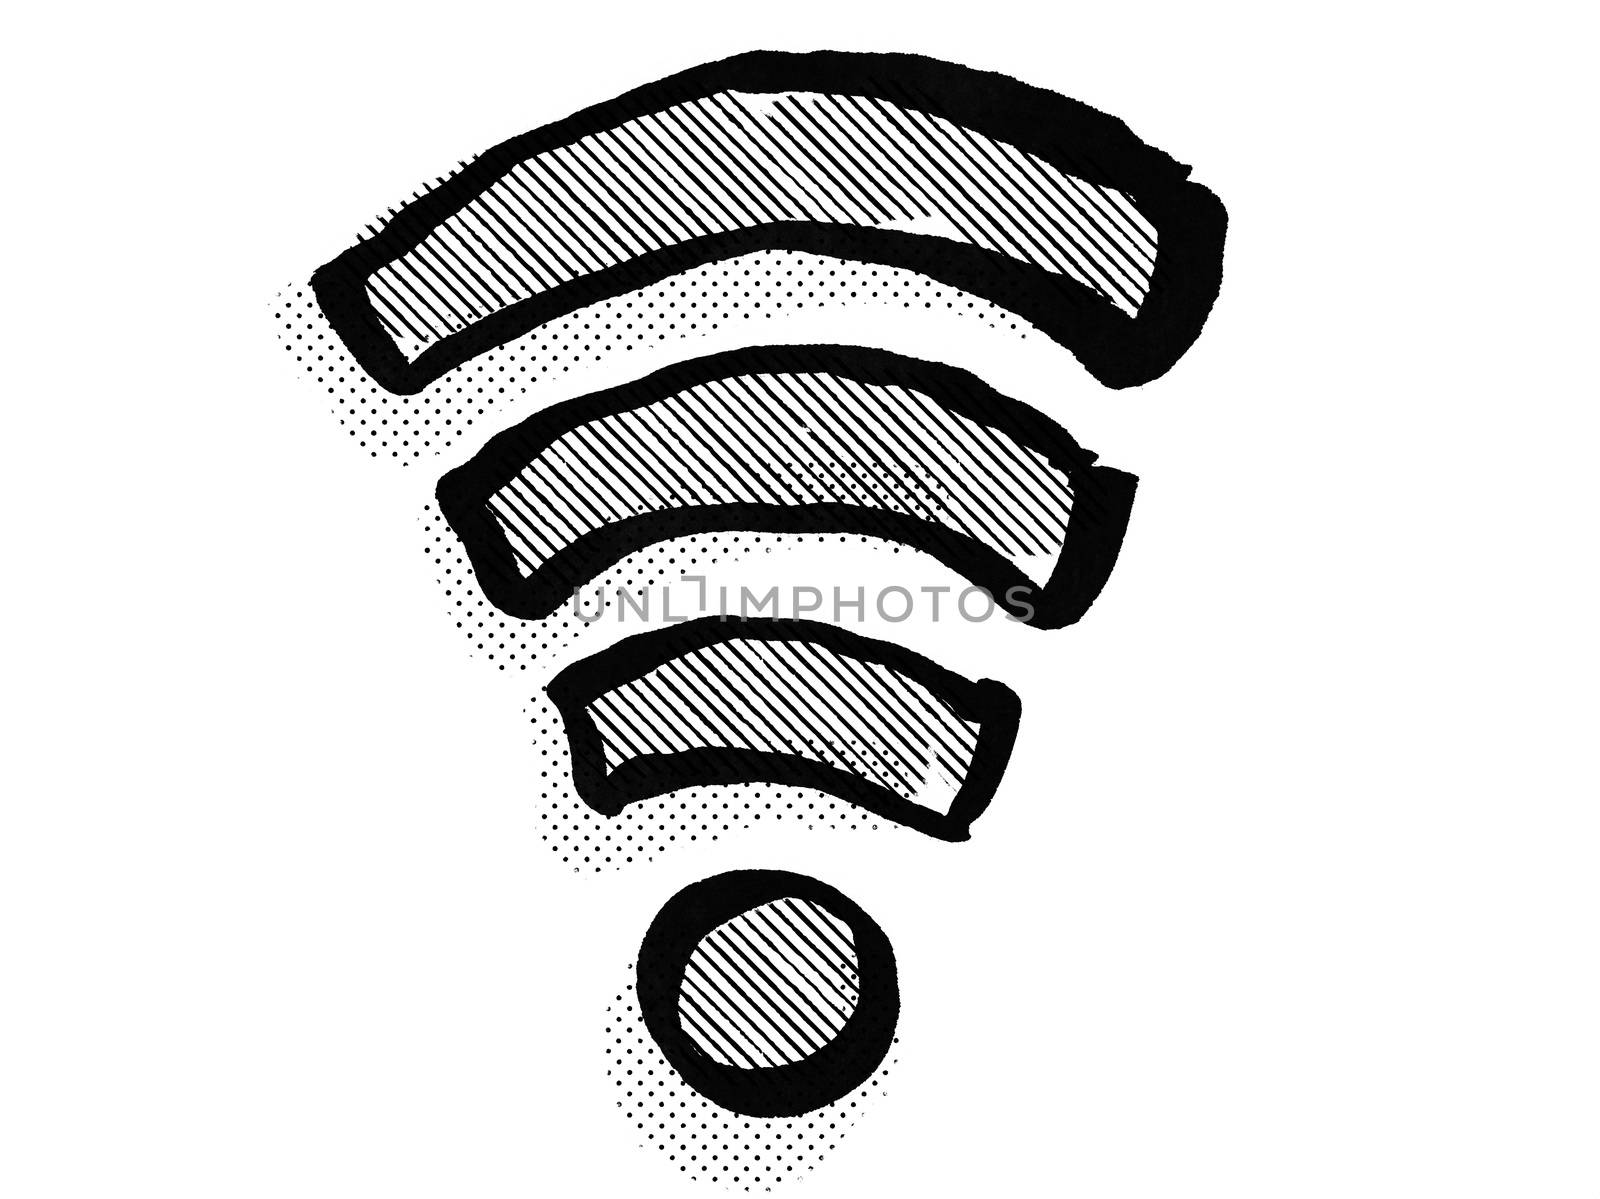 Retro cartoon style drawing of a wifi internet connection symbol icon  on isolated white background done in black and white